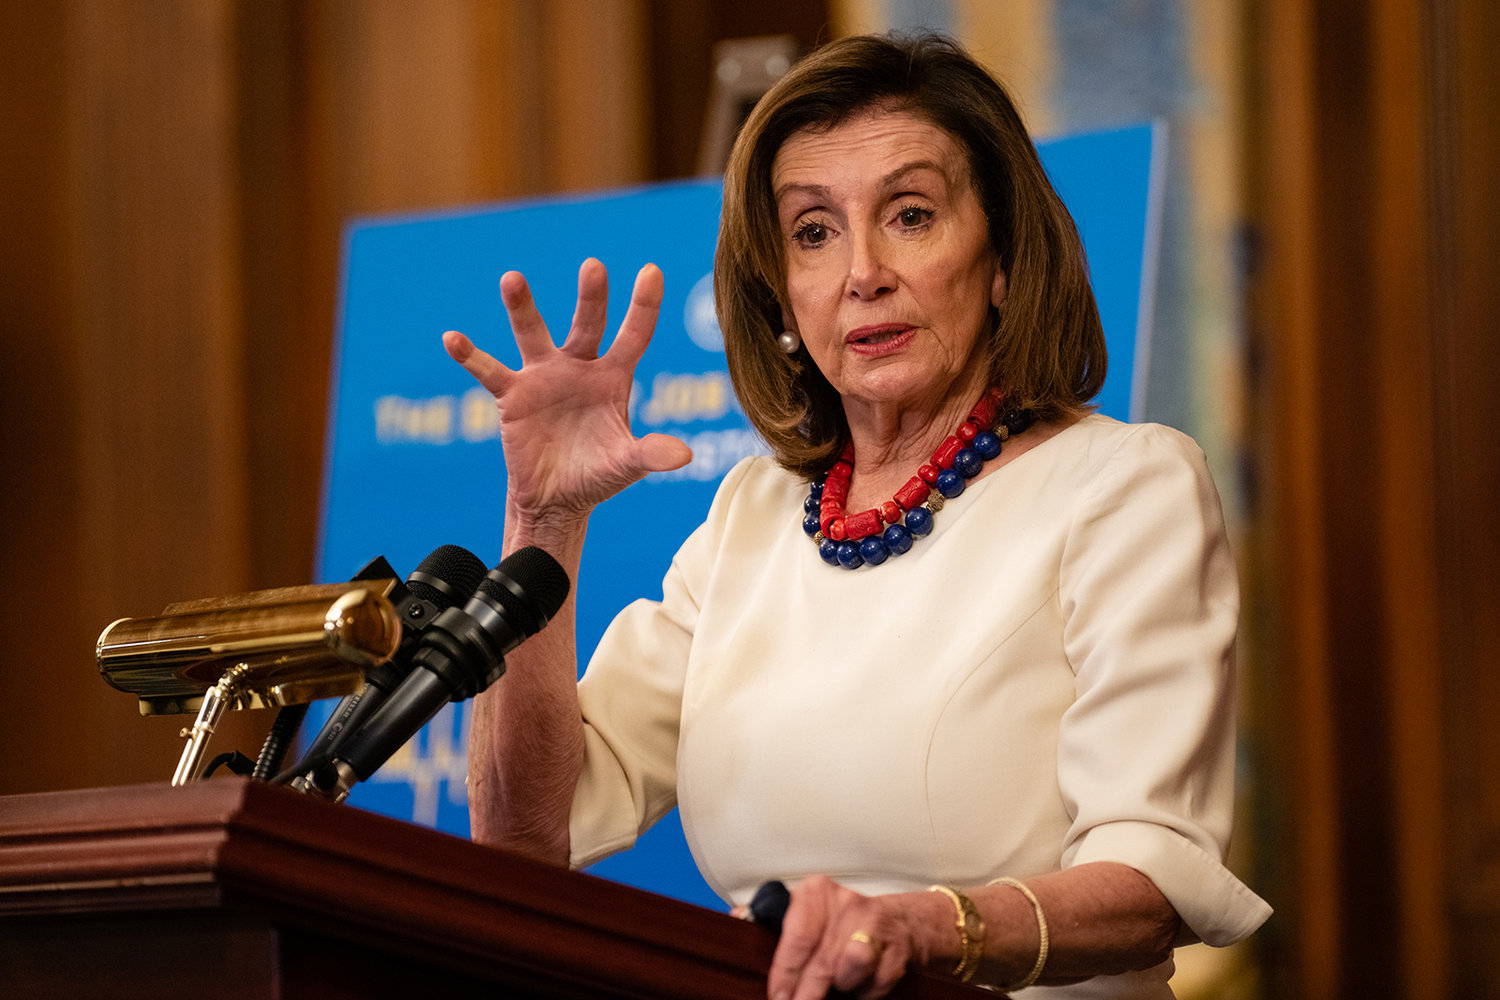 Speaker of the House Nancy Pelosi (D-CA) talks to reporters during her weekly news conference on Capitol Hill on Jan. 20, 2022, in Washington, DC. (Eric Lee/Pool/Getty Images/TNS)